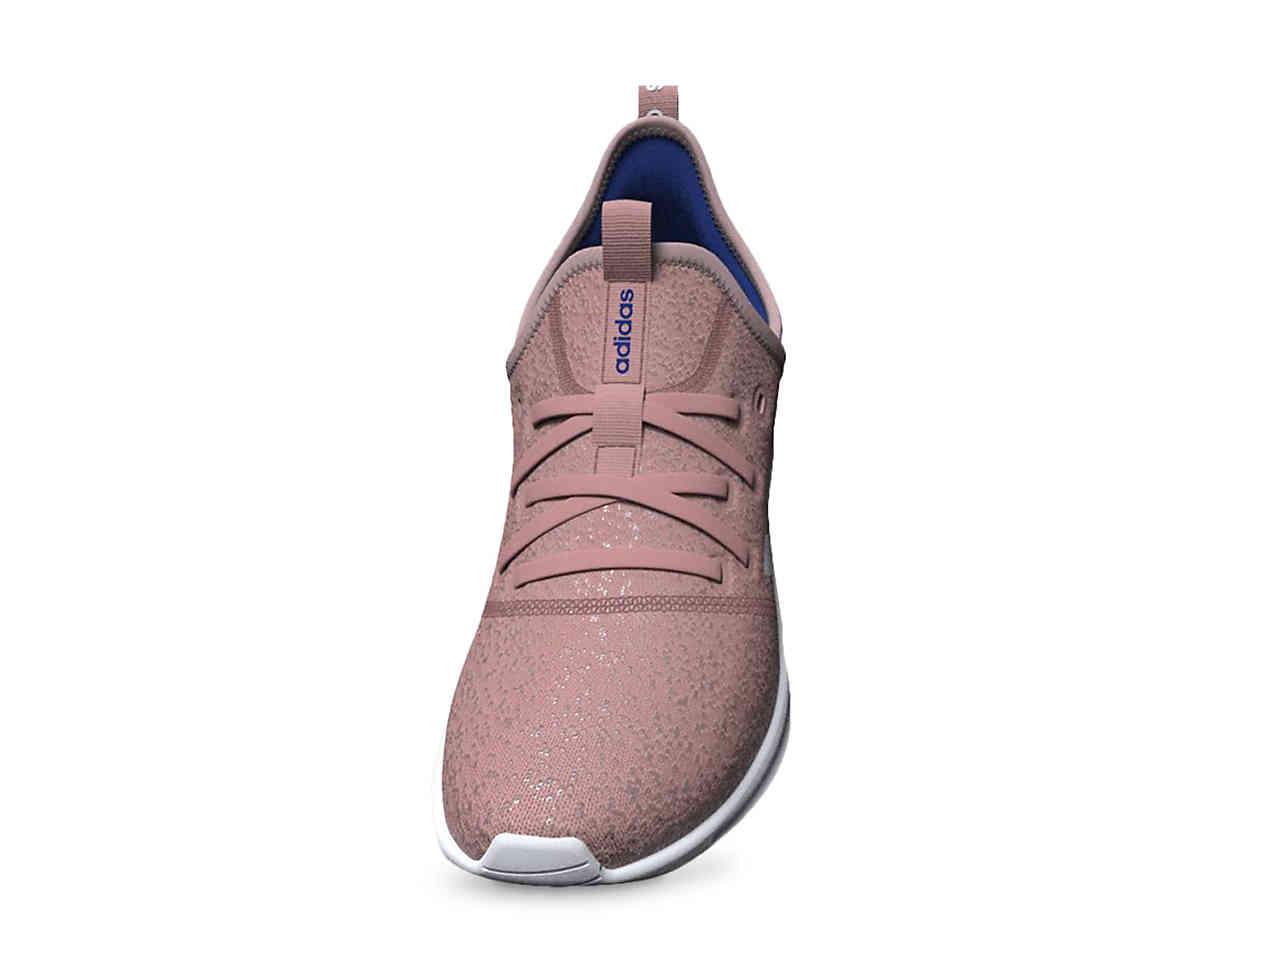 adidas Synthetic Cloudfoam Pure Running Shoe in Blush (Pink) | Lyst